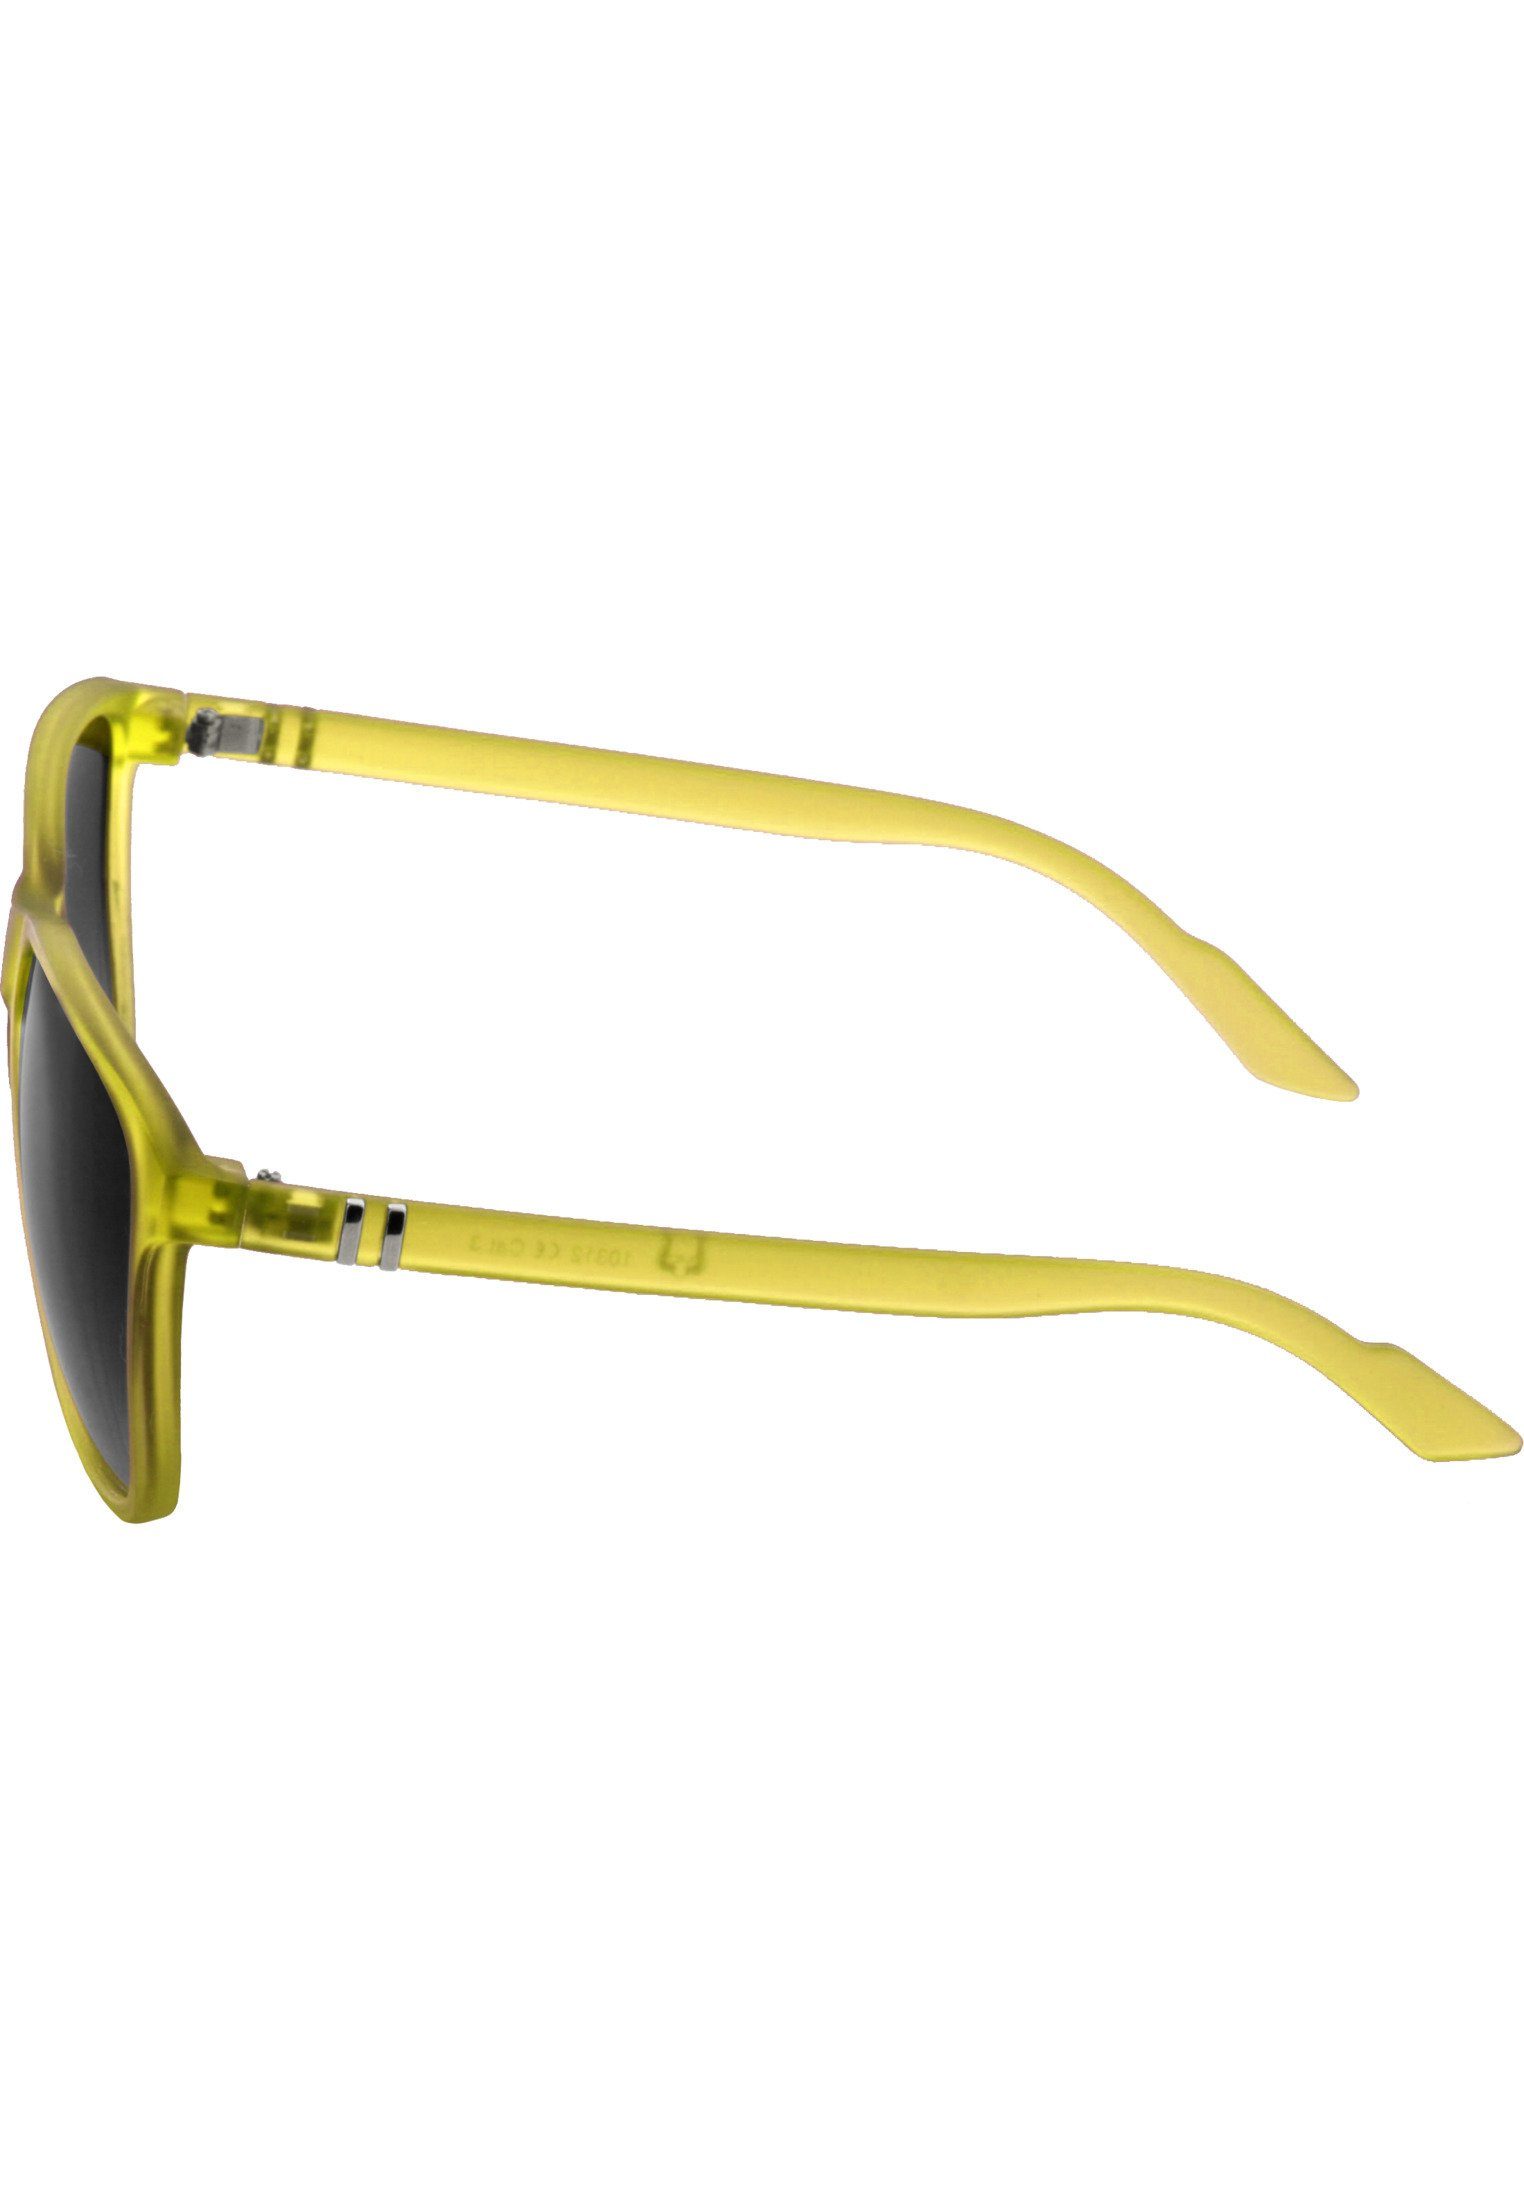 MSTRDS Sonnenbrille Accessoires Sunglasses neonyellow Chirwa